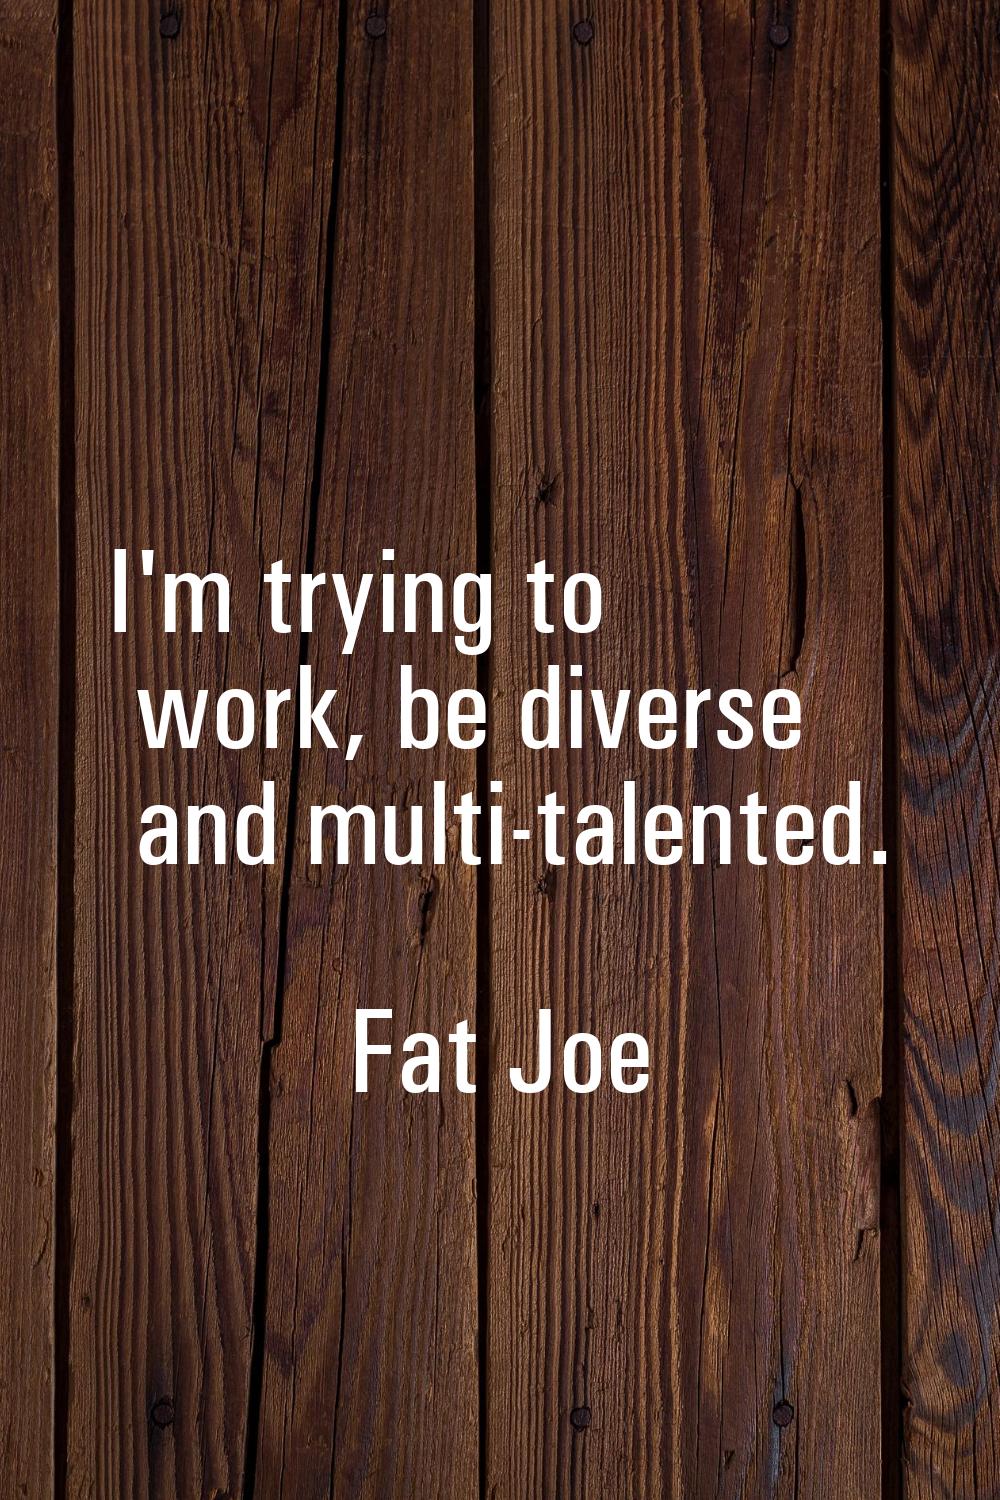 I'm trying to work, be diverse and multi-talented.